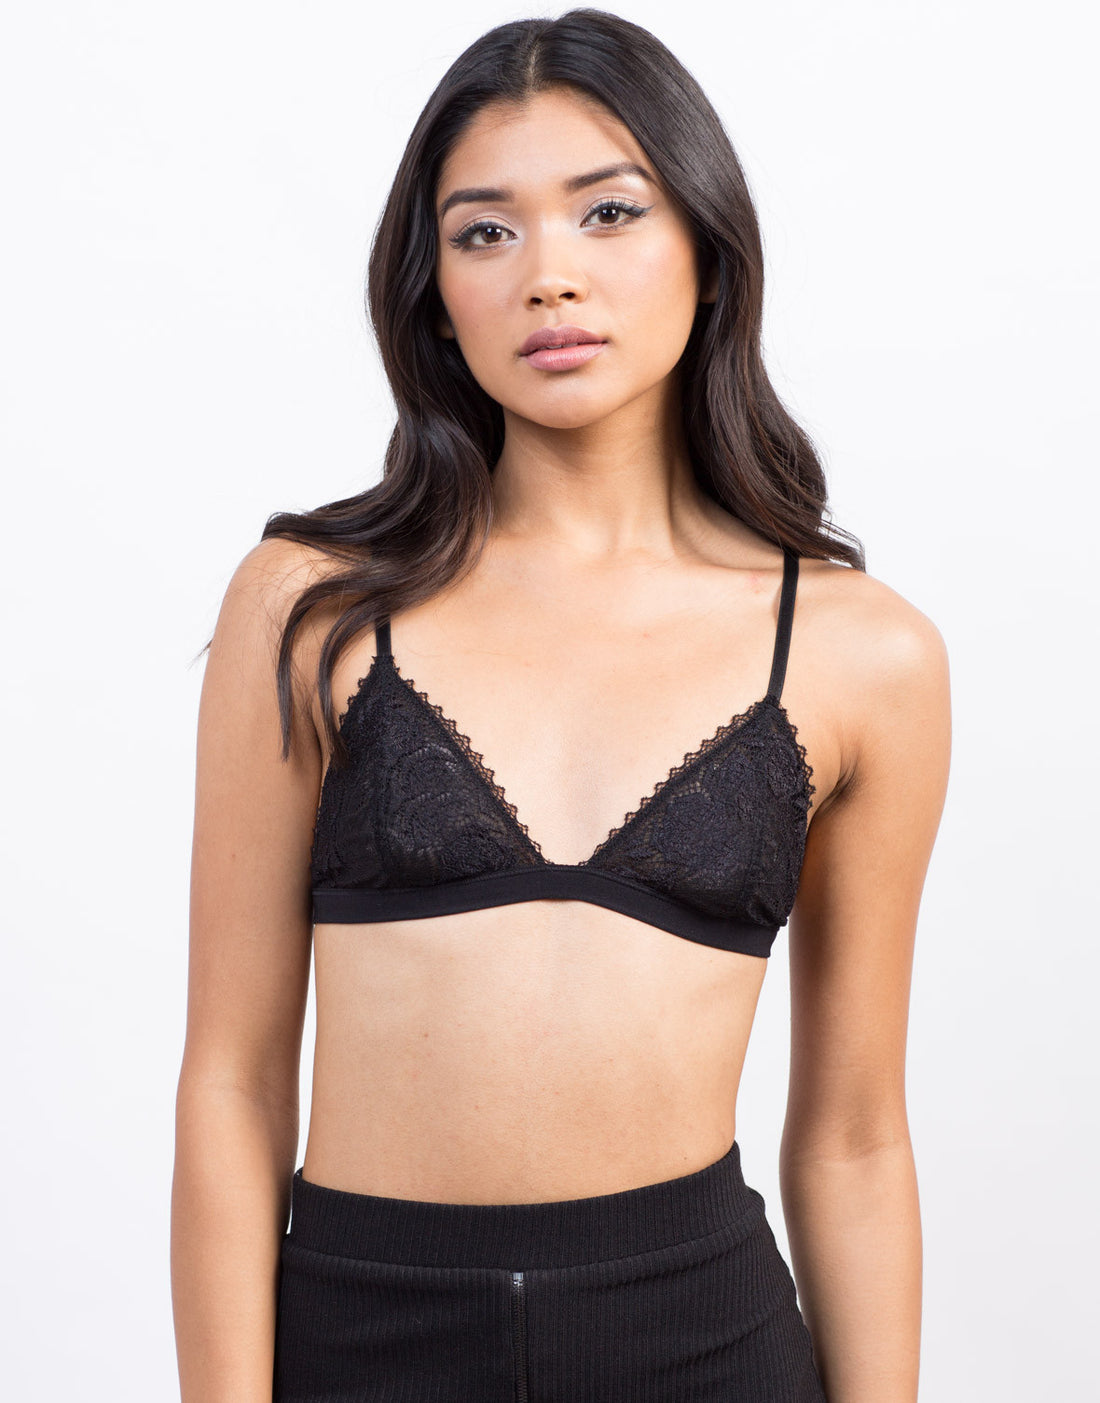 Rosey Lace Bralette Intimates Black S/M -2020AVE